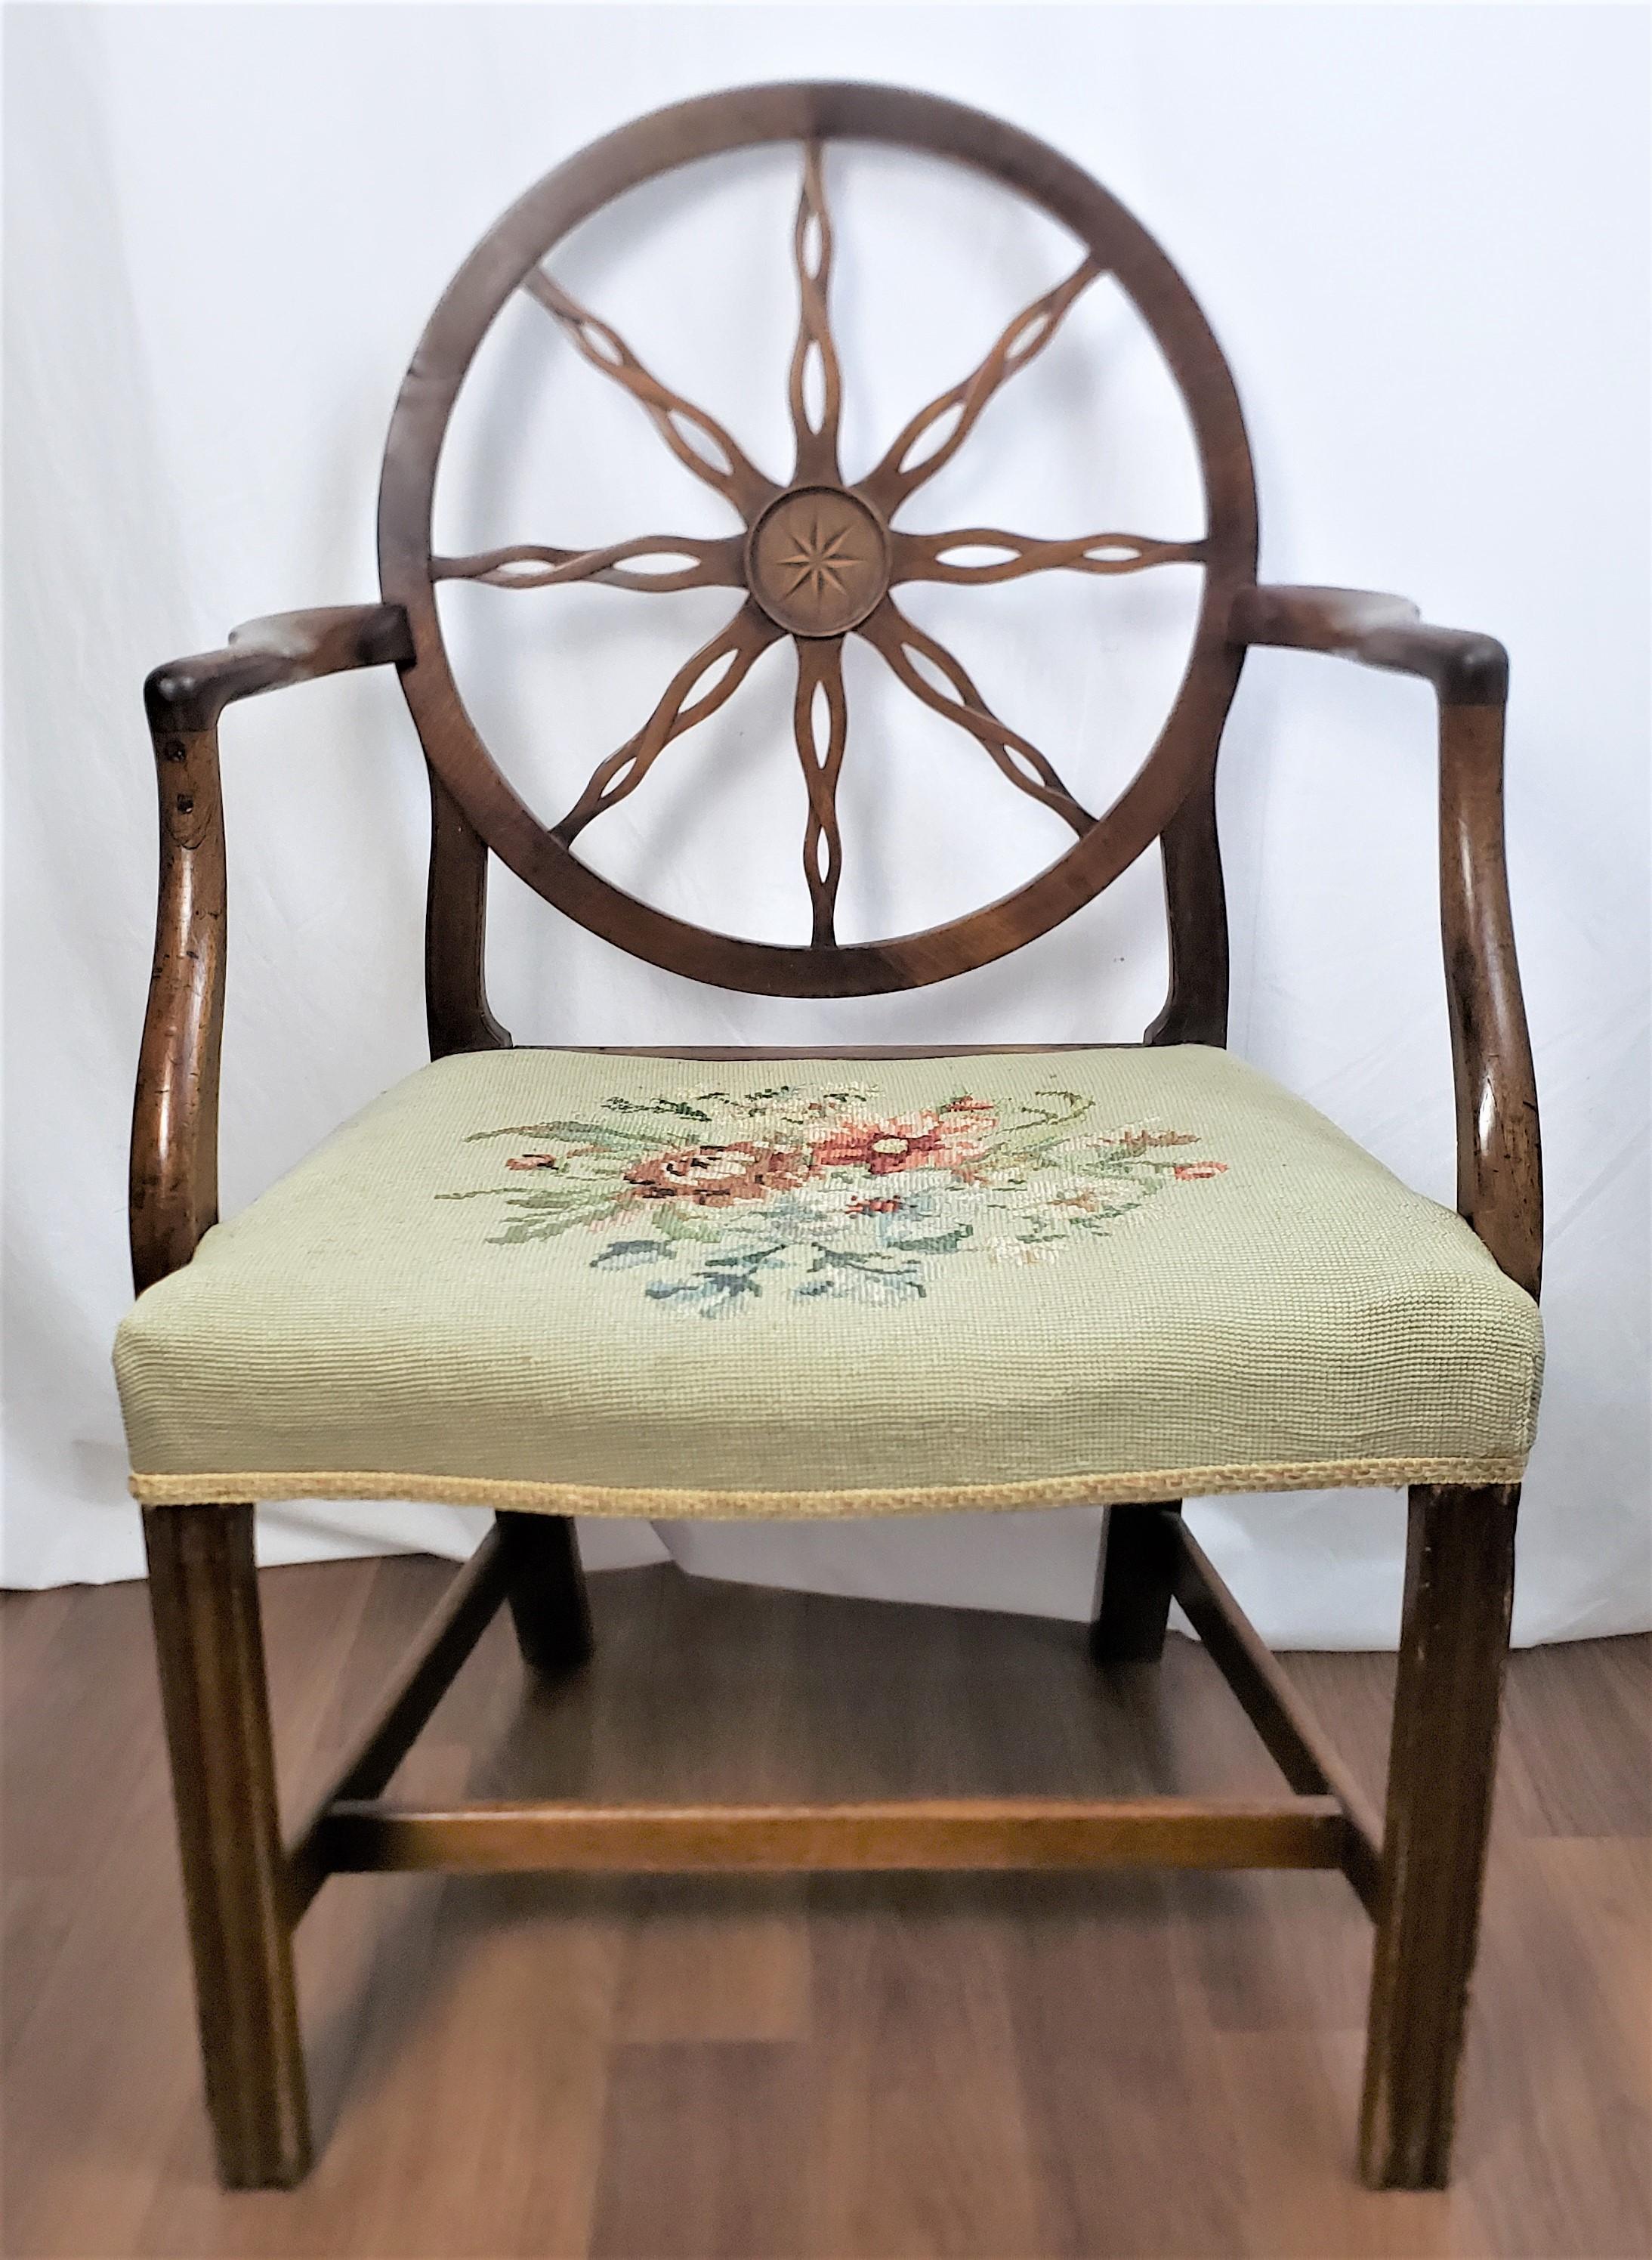 This antique armchair frame is unsigned, but presumed to have originated from England and date to approximately 1790 and done in the period King George III style. The chair is composed of walnut and features a large spoked wheel back with a stylized